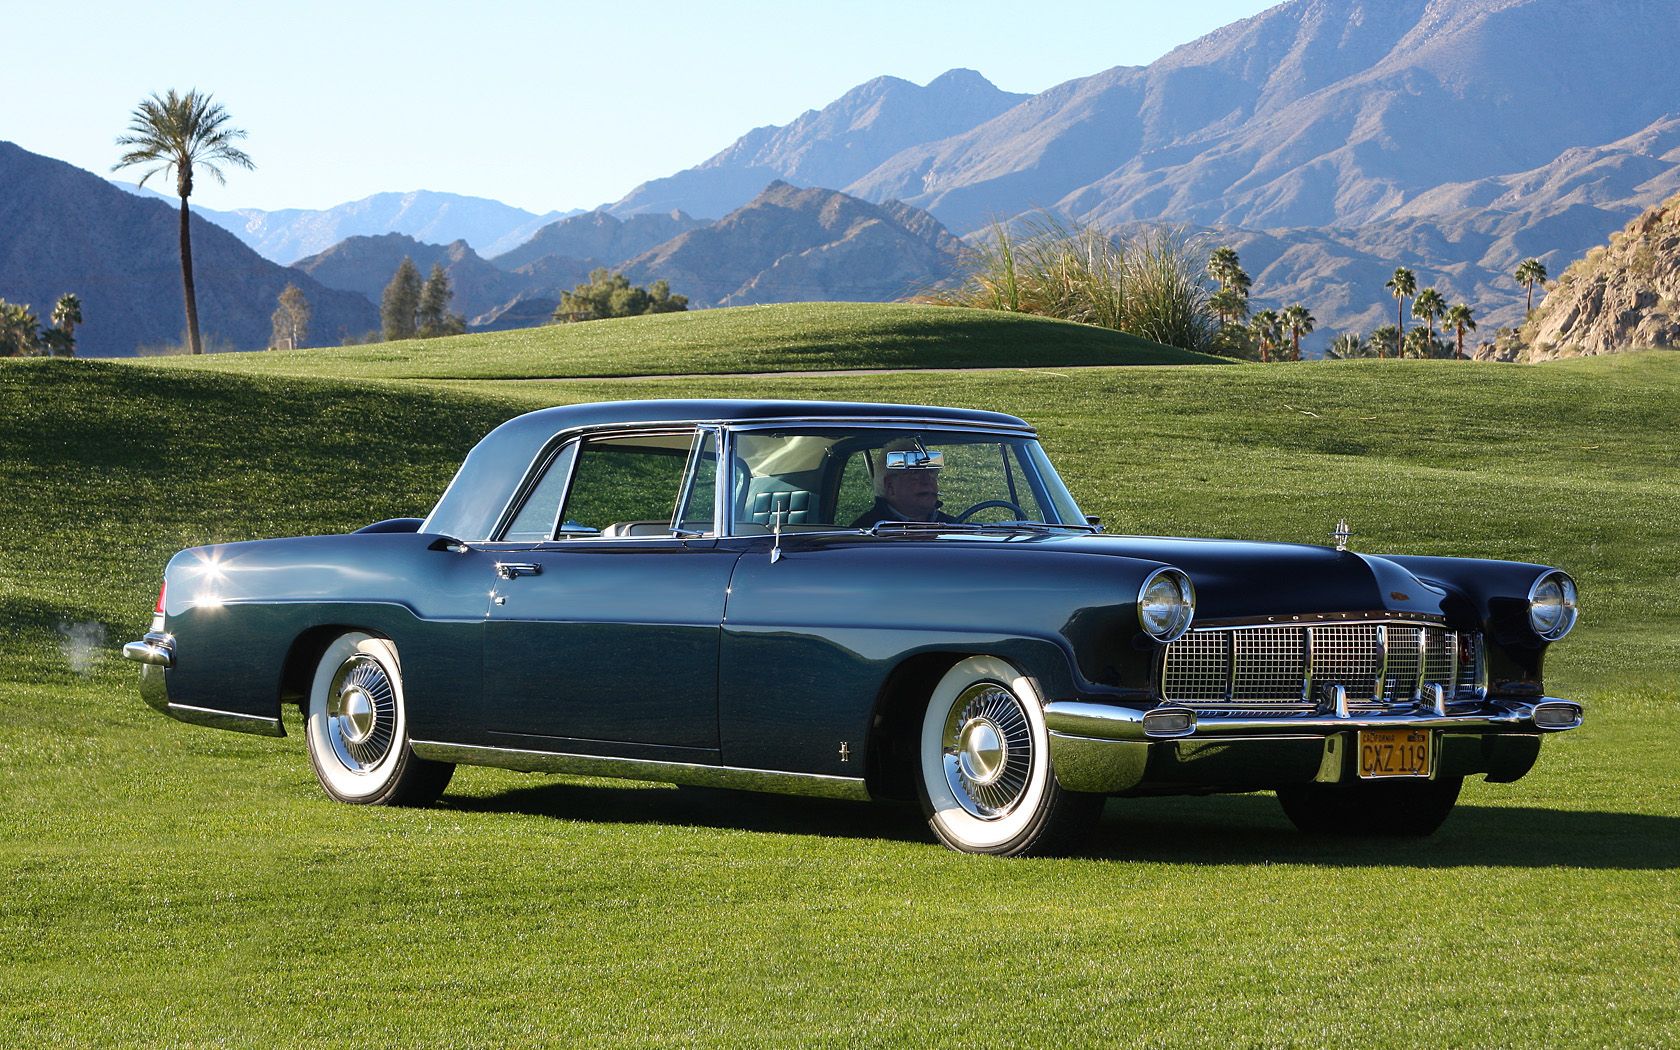 A navy blue 1950s Lincoln Continental